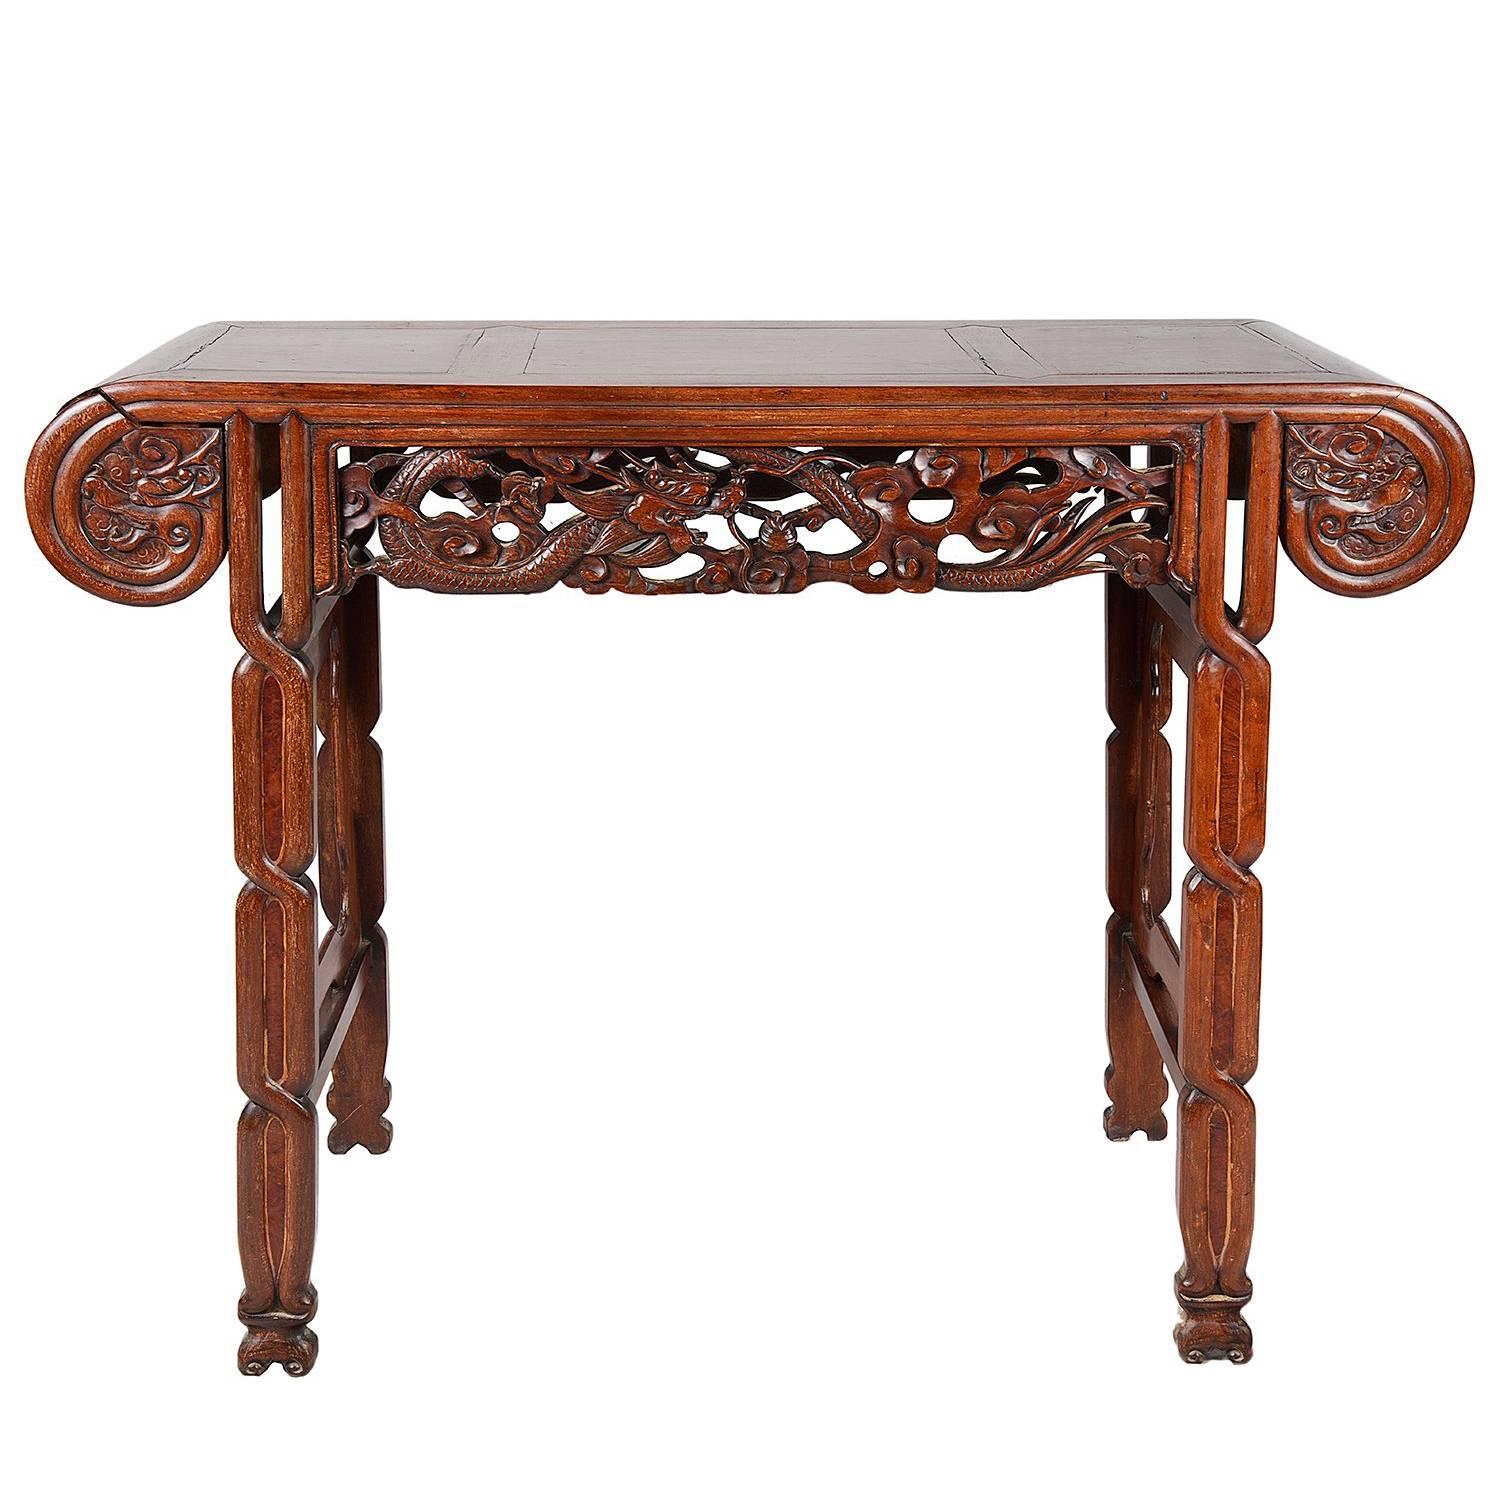 Chinese Hardwood Alter Table, 19th Century